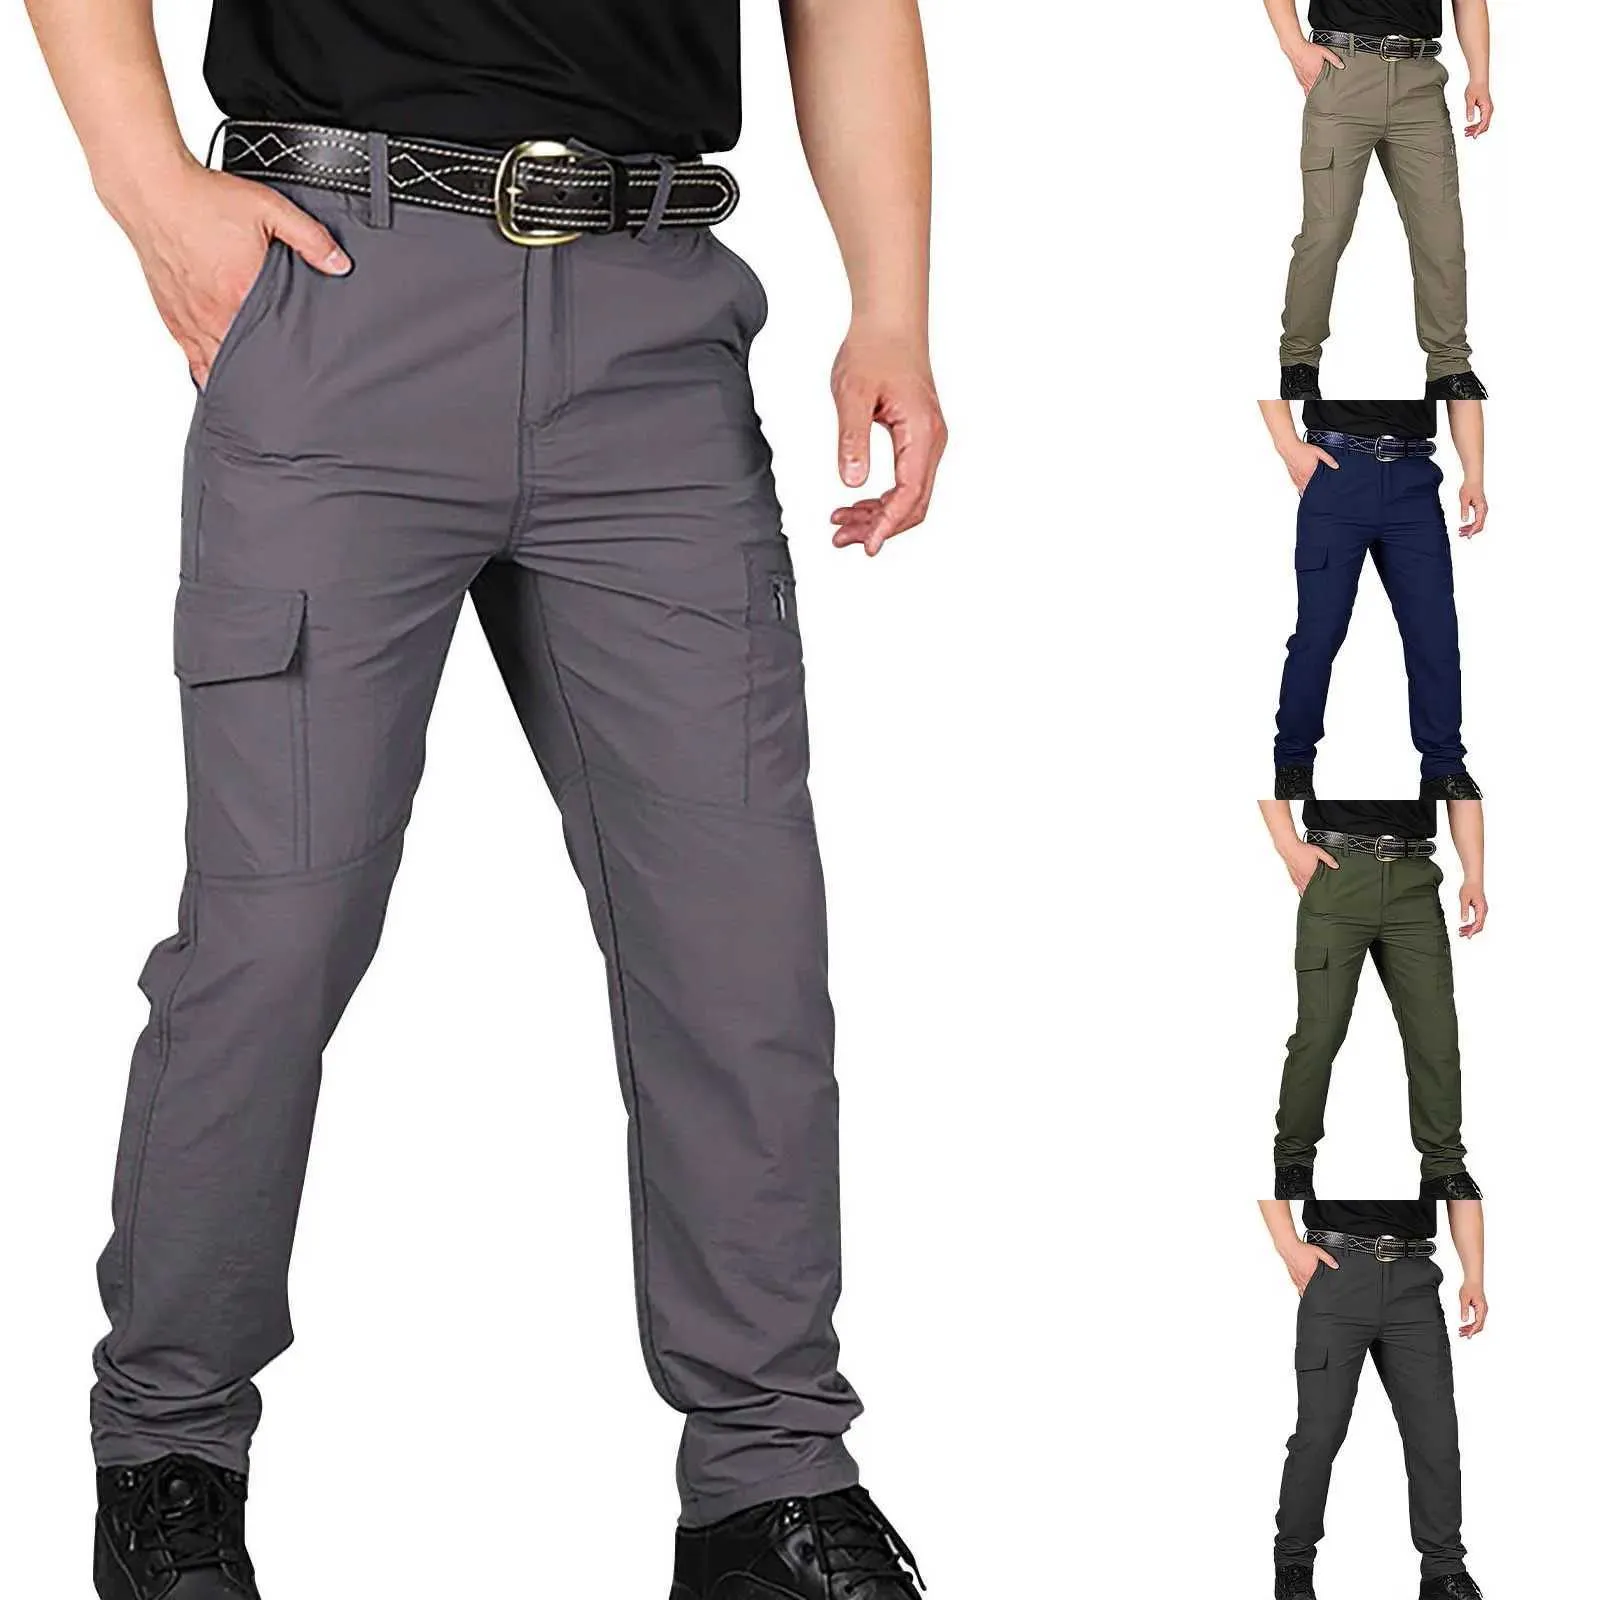 Men's Pants Mens urban military tactical pants combat cargo soldier multiple pockets waterproof and wear-resistant casual training jacketL2403